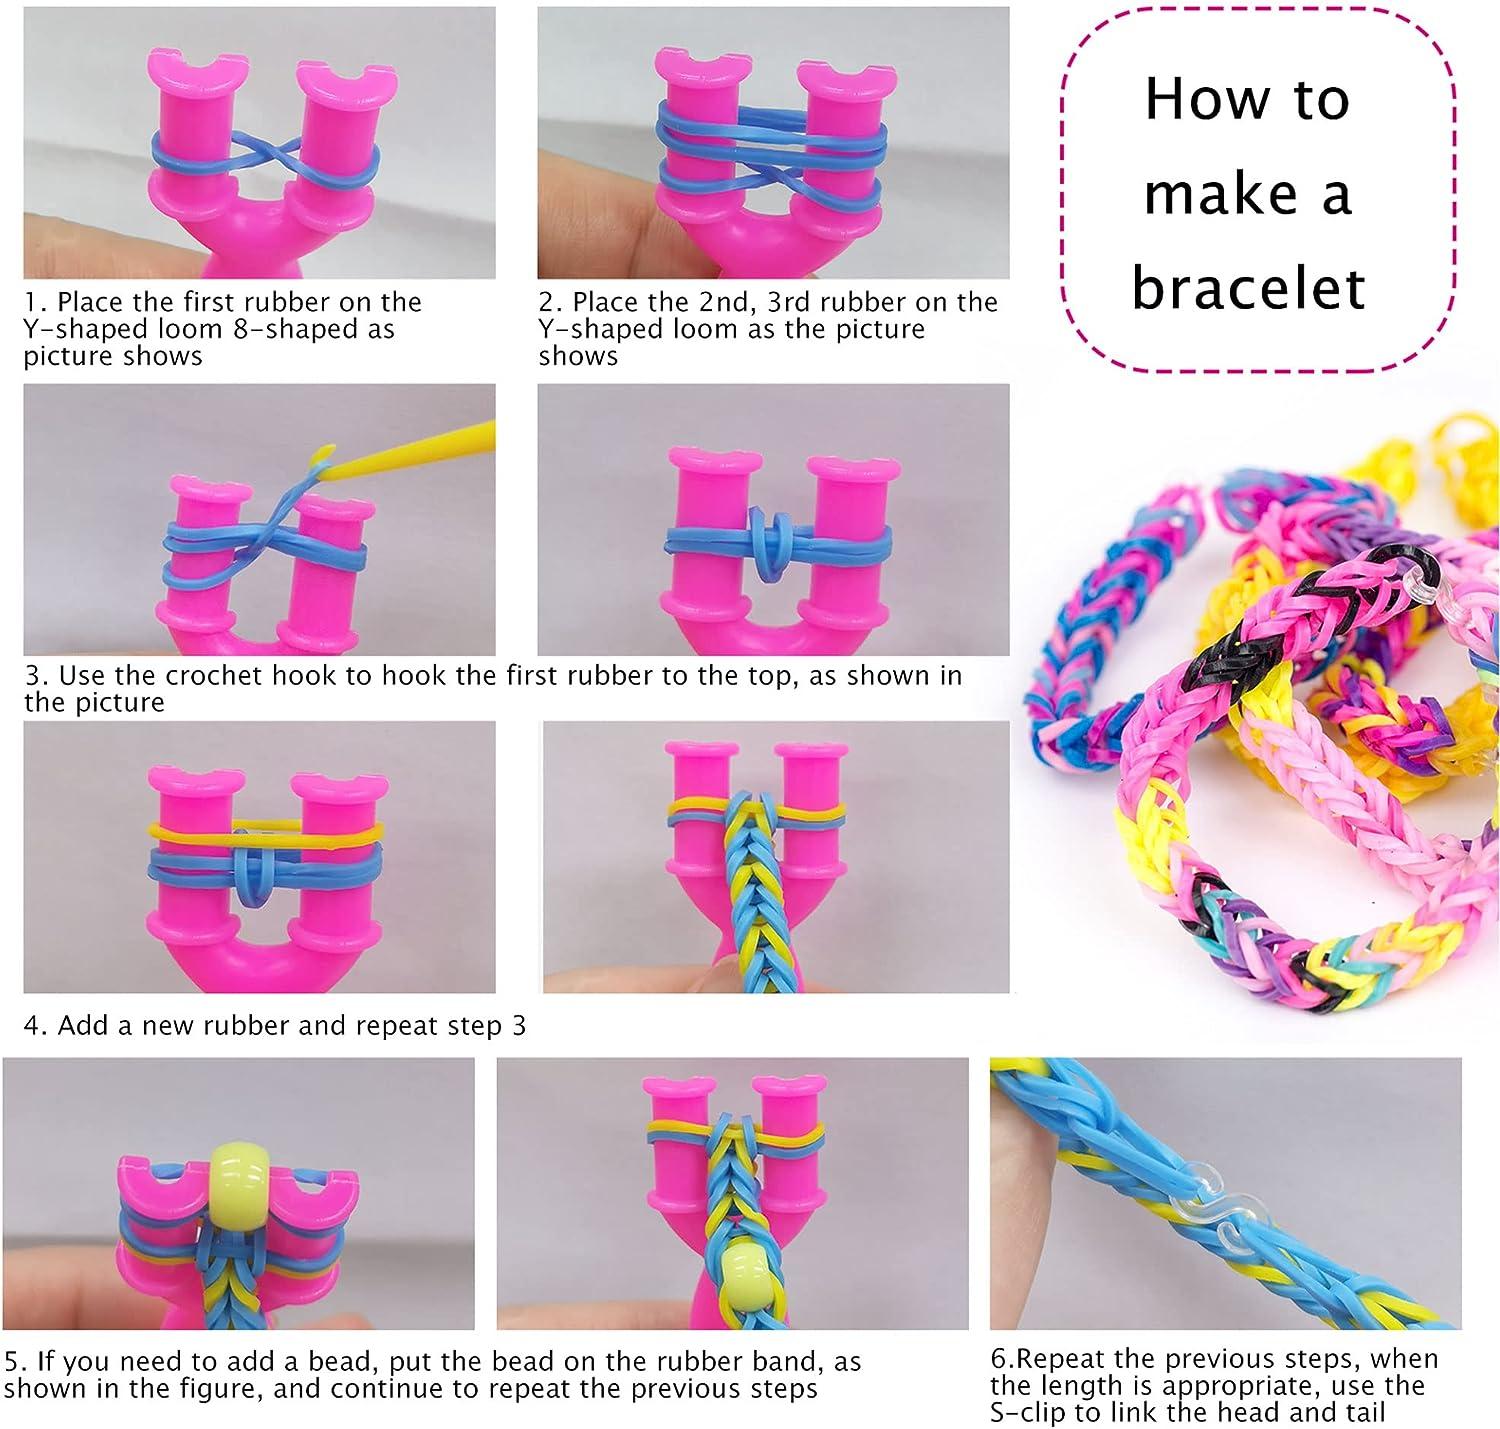 Seven Boy Approved Rainbow Loom Band Projects - Frugal Fun For Boys and  Girls | Rainbow loom bands, Rainbow loom, Loom bands